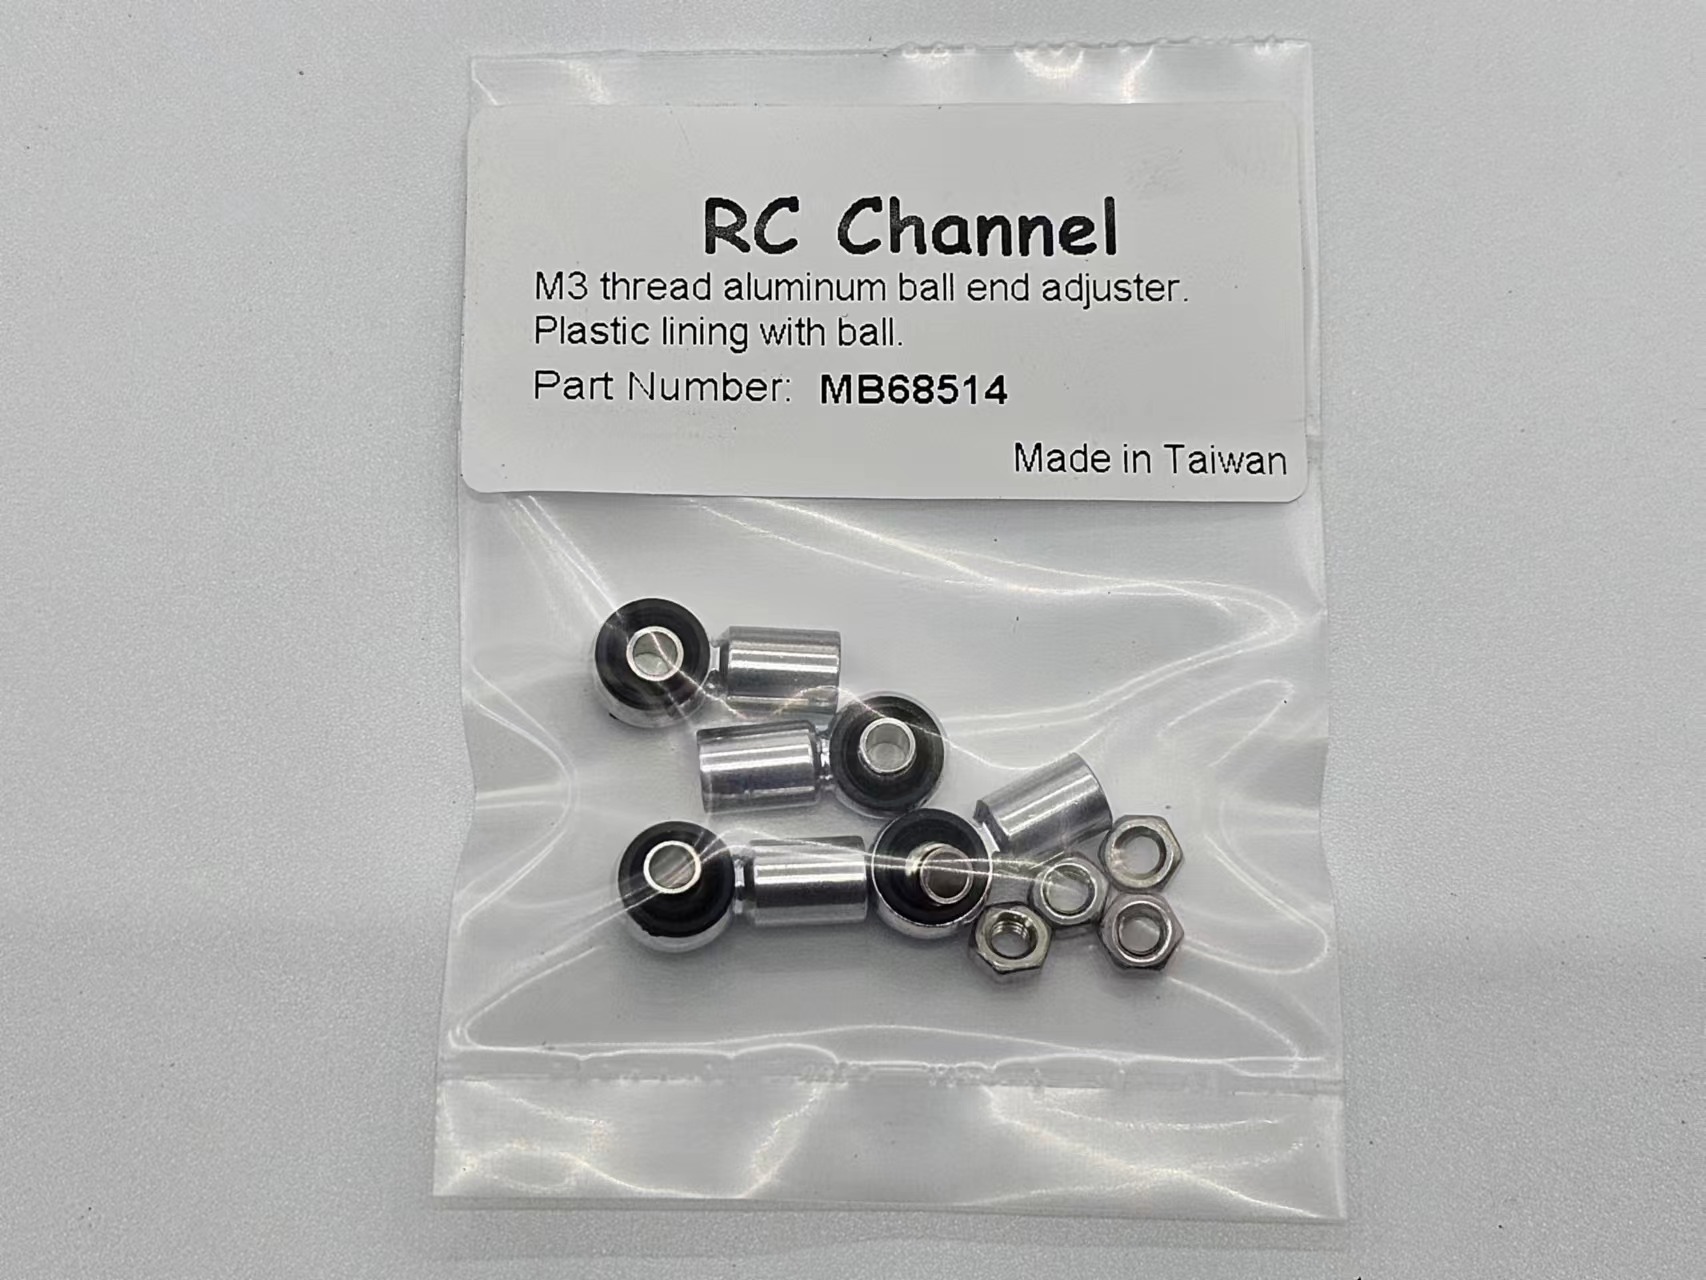 M3 thread aluminum ball end adjuster with plastic lining.